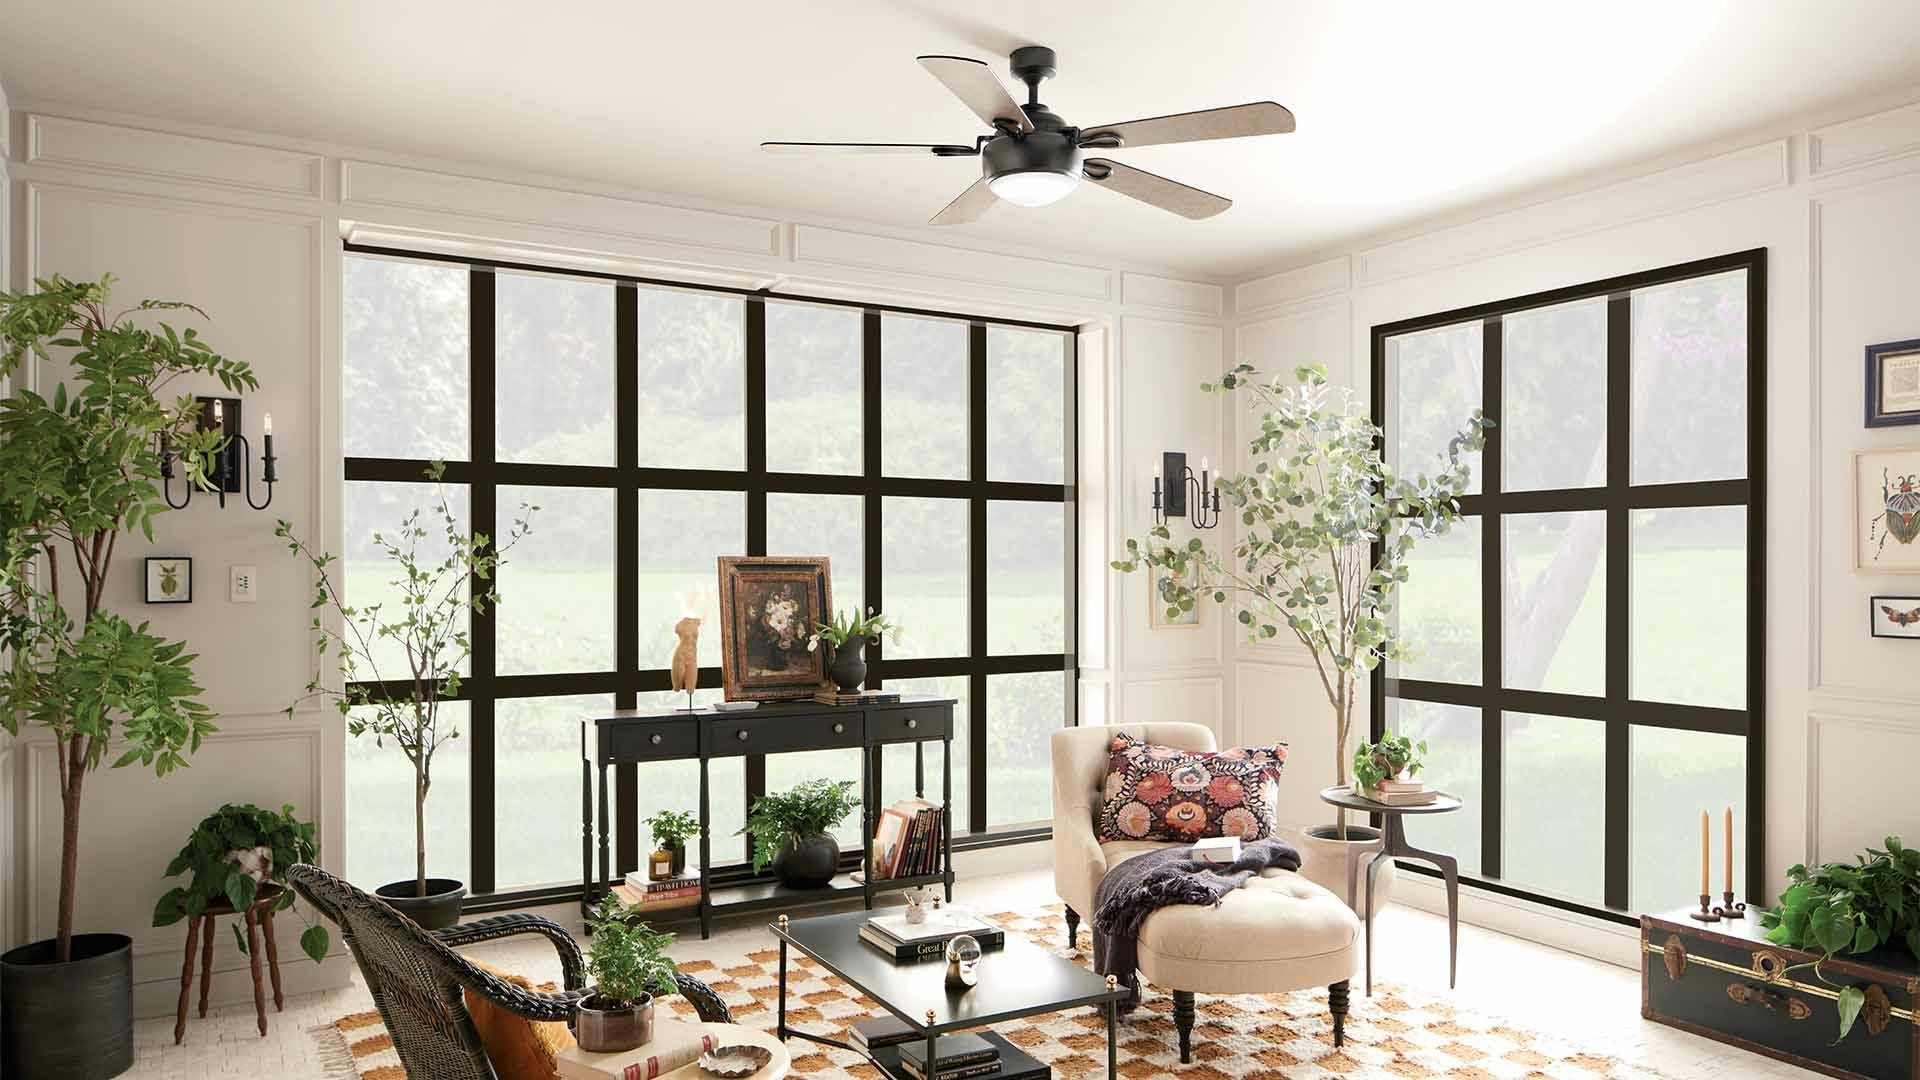 Living room with large windows, Humble ceiling fan in anvil iron.